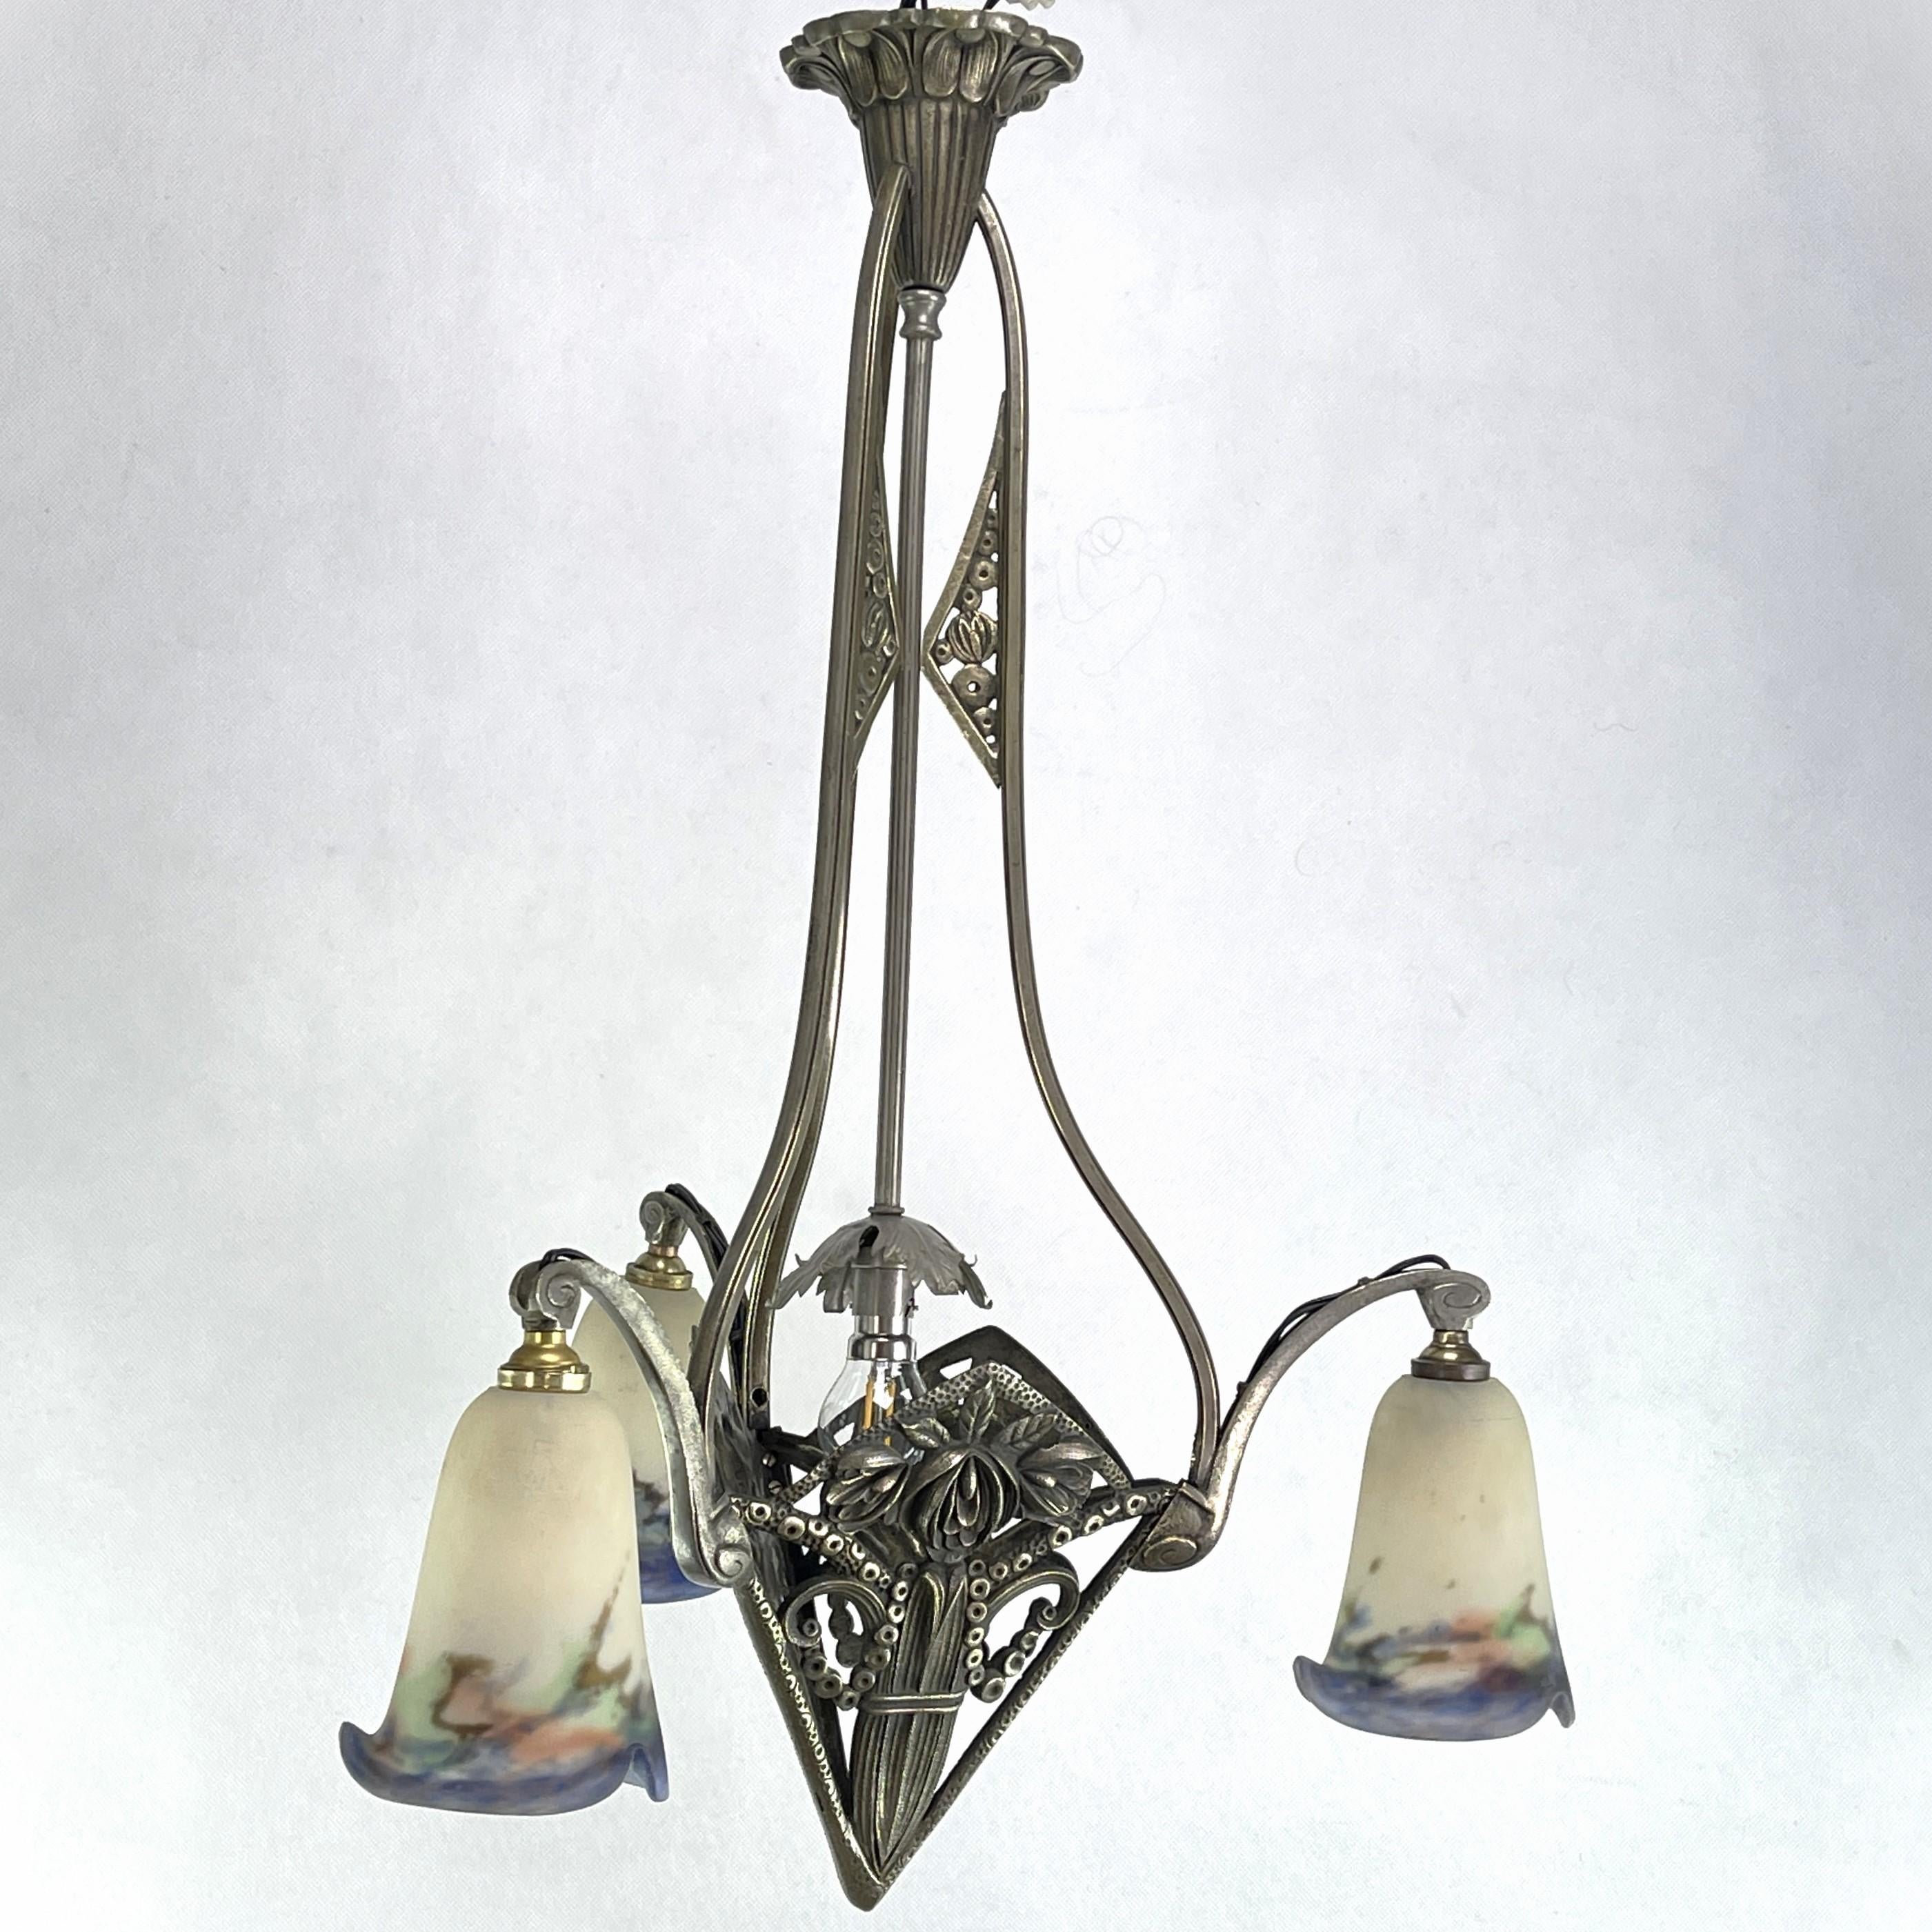 Art Deco chandelier by Muller Fréres - 1930s.

This original hanging lamp captivates with its clear Art Deco design. The heavy lamp is nickel plated. The coloured Pate de Verre glasses are signed and give a very pleasant light. This ceiling lamp